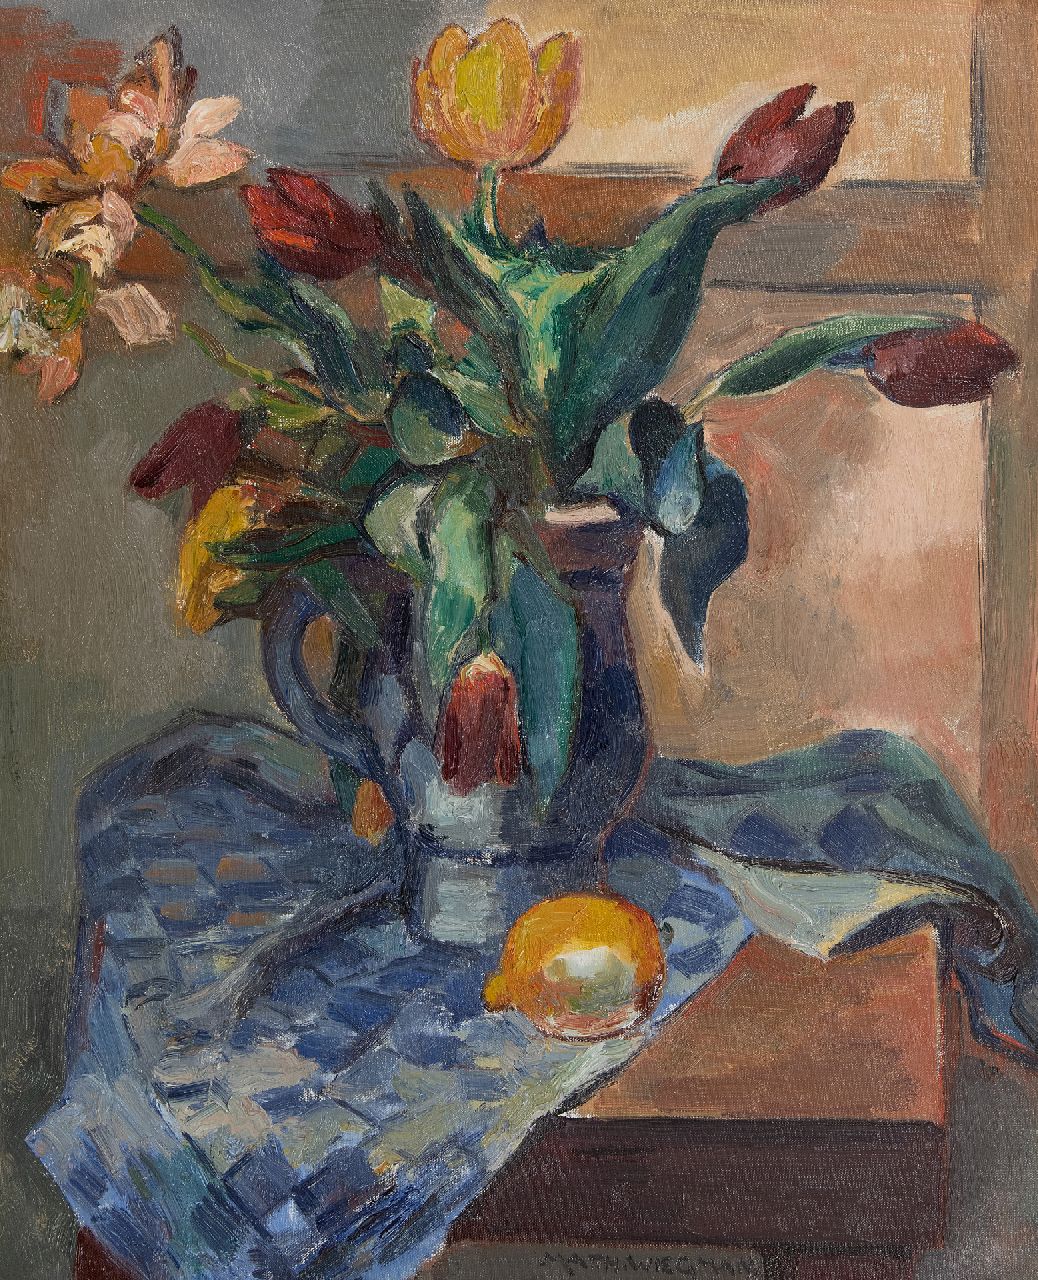 Wiegman M.J.M.  | Mattheus Johannes Marie 'Matthieu' Wiegman | Paintings offered for sale | A still life with tulips and a lemon, oil on canvas 61.4 x 50.1 cm, signed l.c.